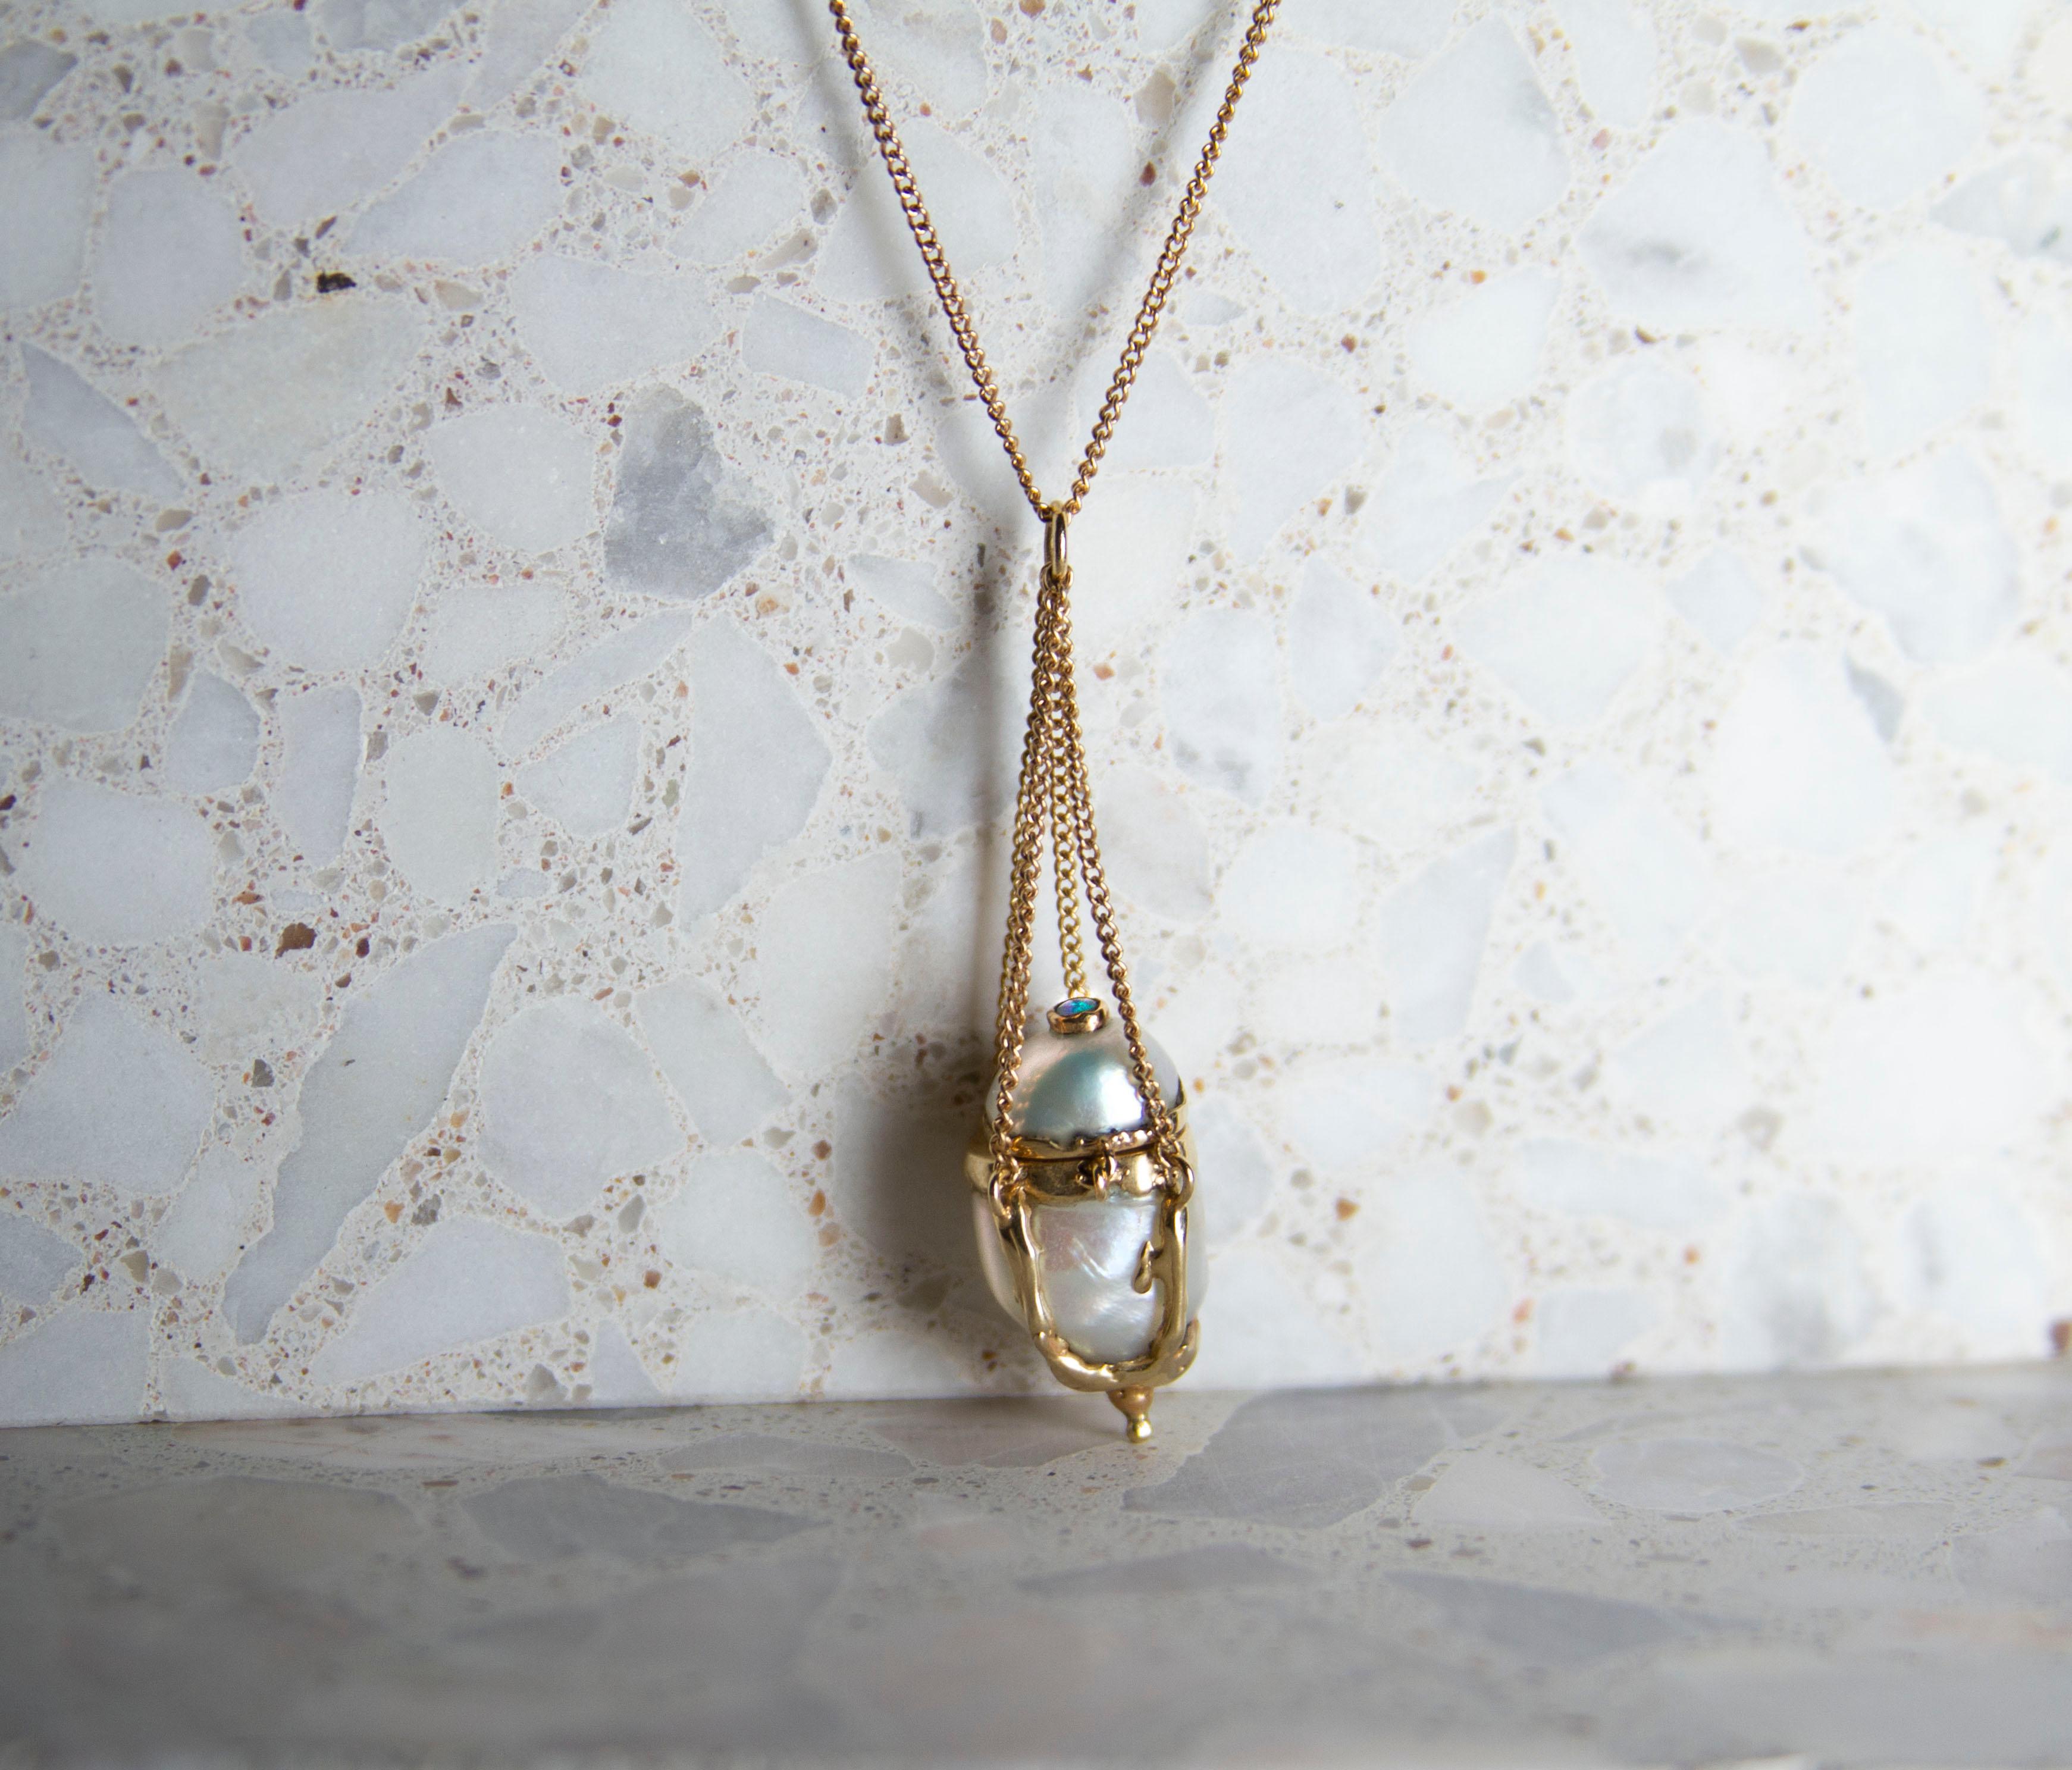 Pearl miniature vessel Necklace in 14k Gold.

Designed and created by Julia de Souzain New York.

Julia de Souza is a Brazilian- Costa Rican Jewelry Designer based in NYC.  Her designs are inspired by little stories, music, and mythological